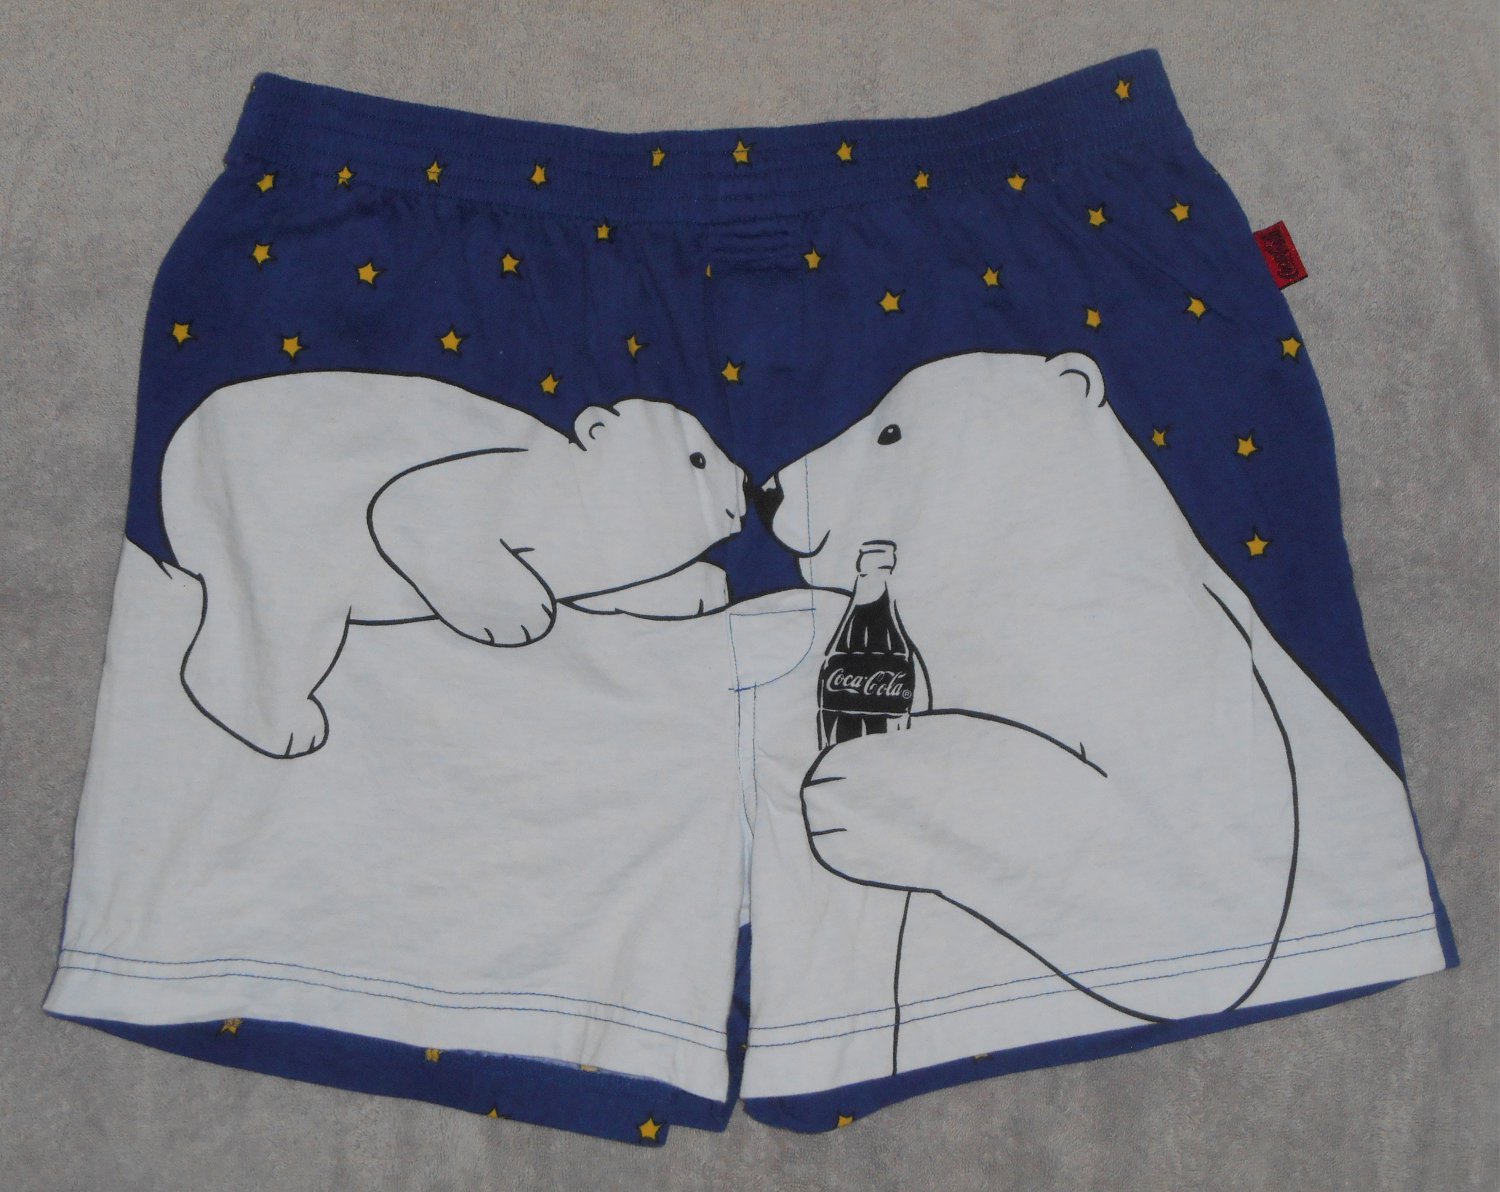 Coca Cola Coke Boxer Shorts Size Large L Polar Bears Touch Noses Stars Underwear Never Worn 2001